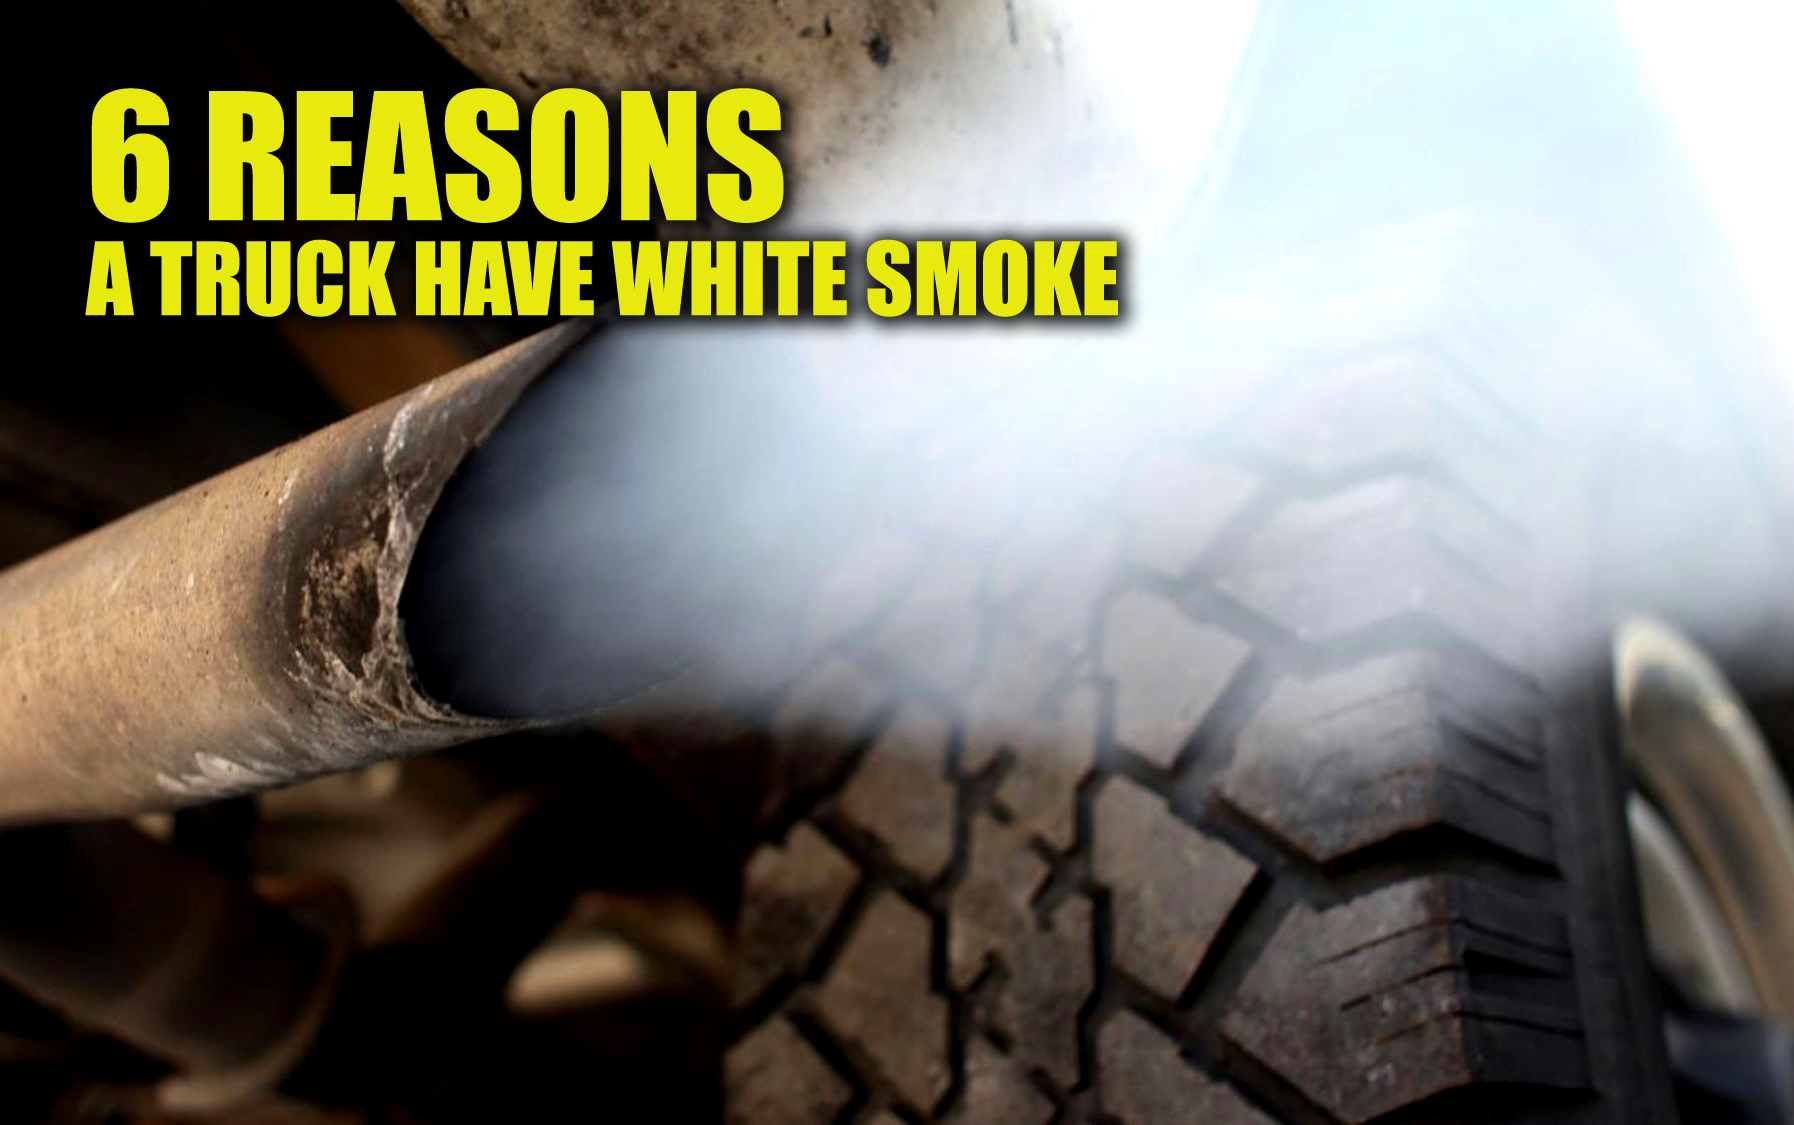 Why Does My Truck Have White Smoke